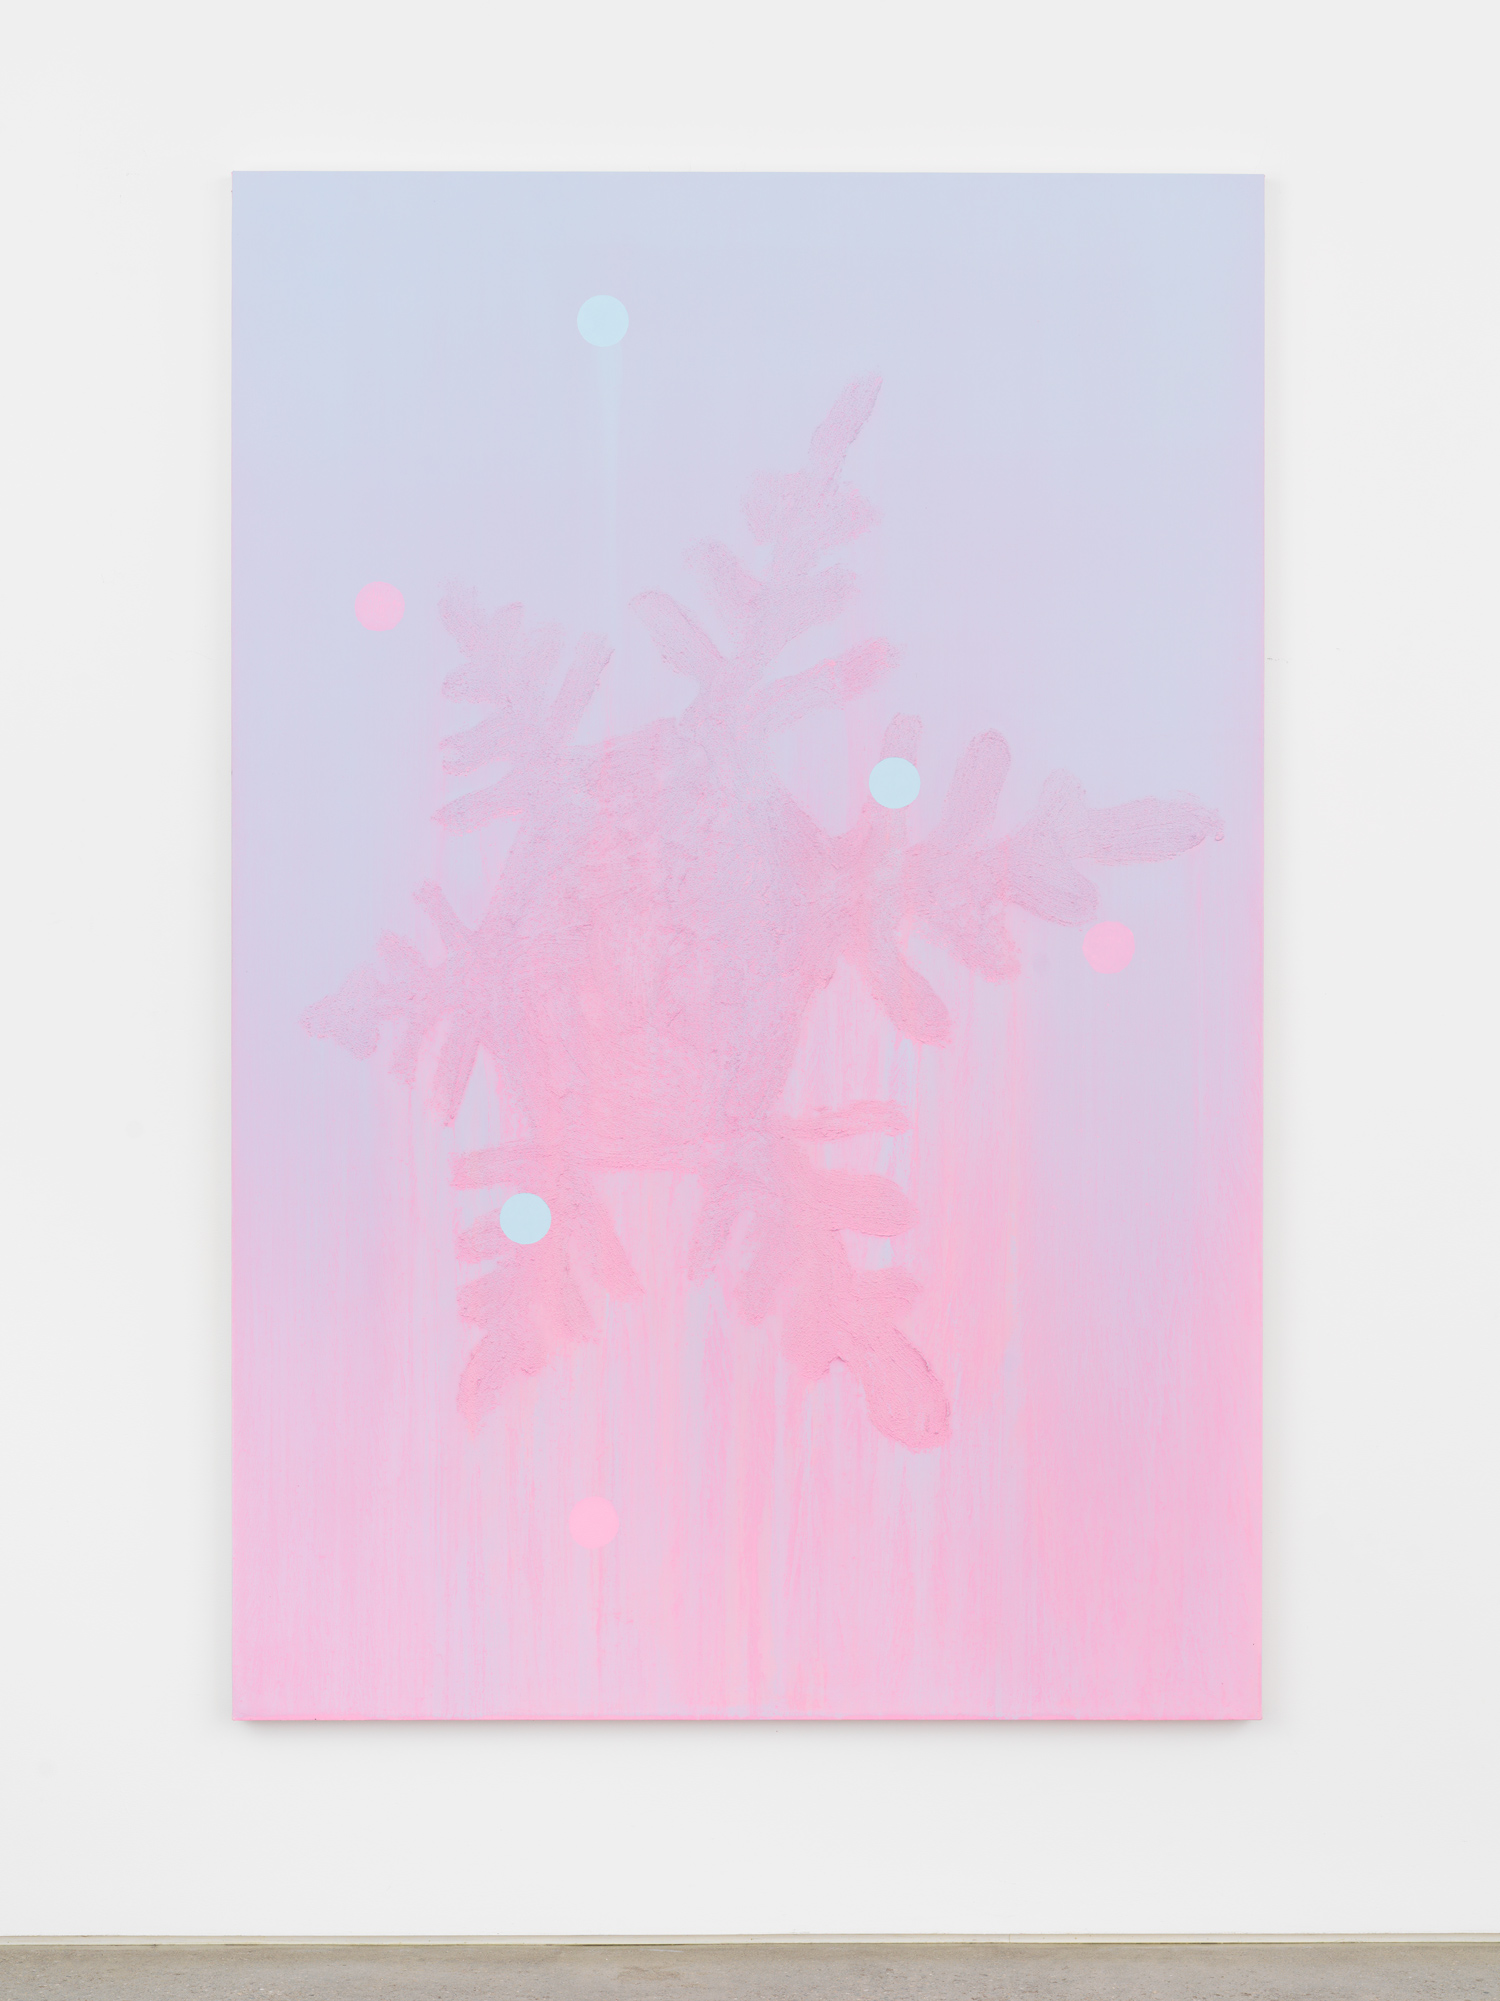 Alex Kwartler, Pink Snowflake, 2019, Oil and pumice on linen, 72h x 48w in.